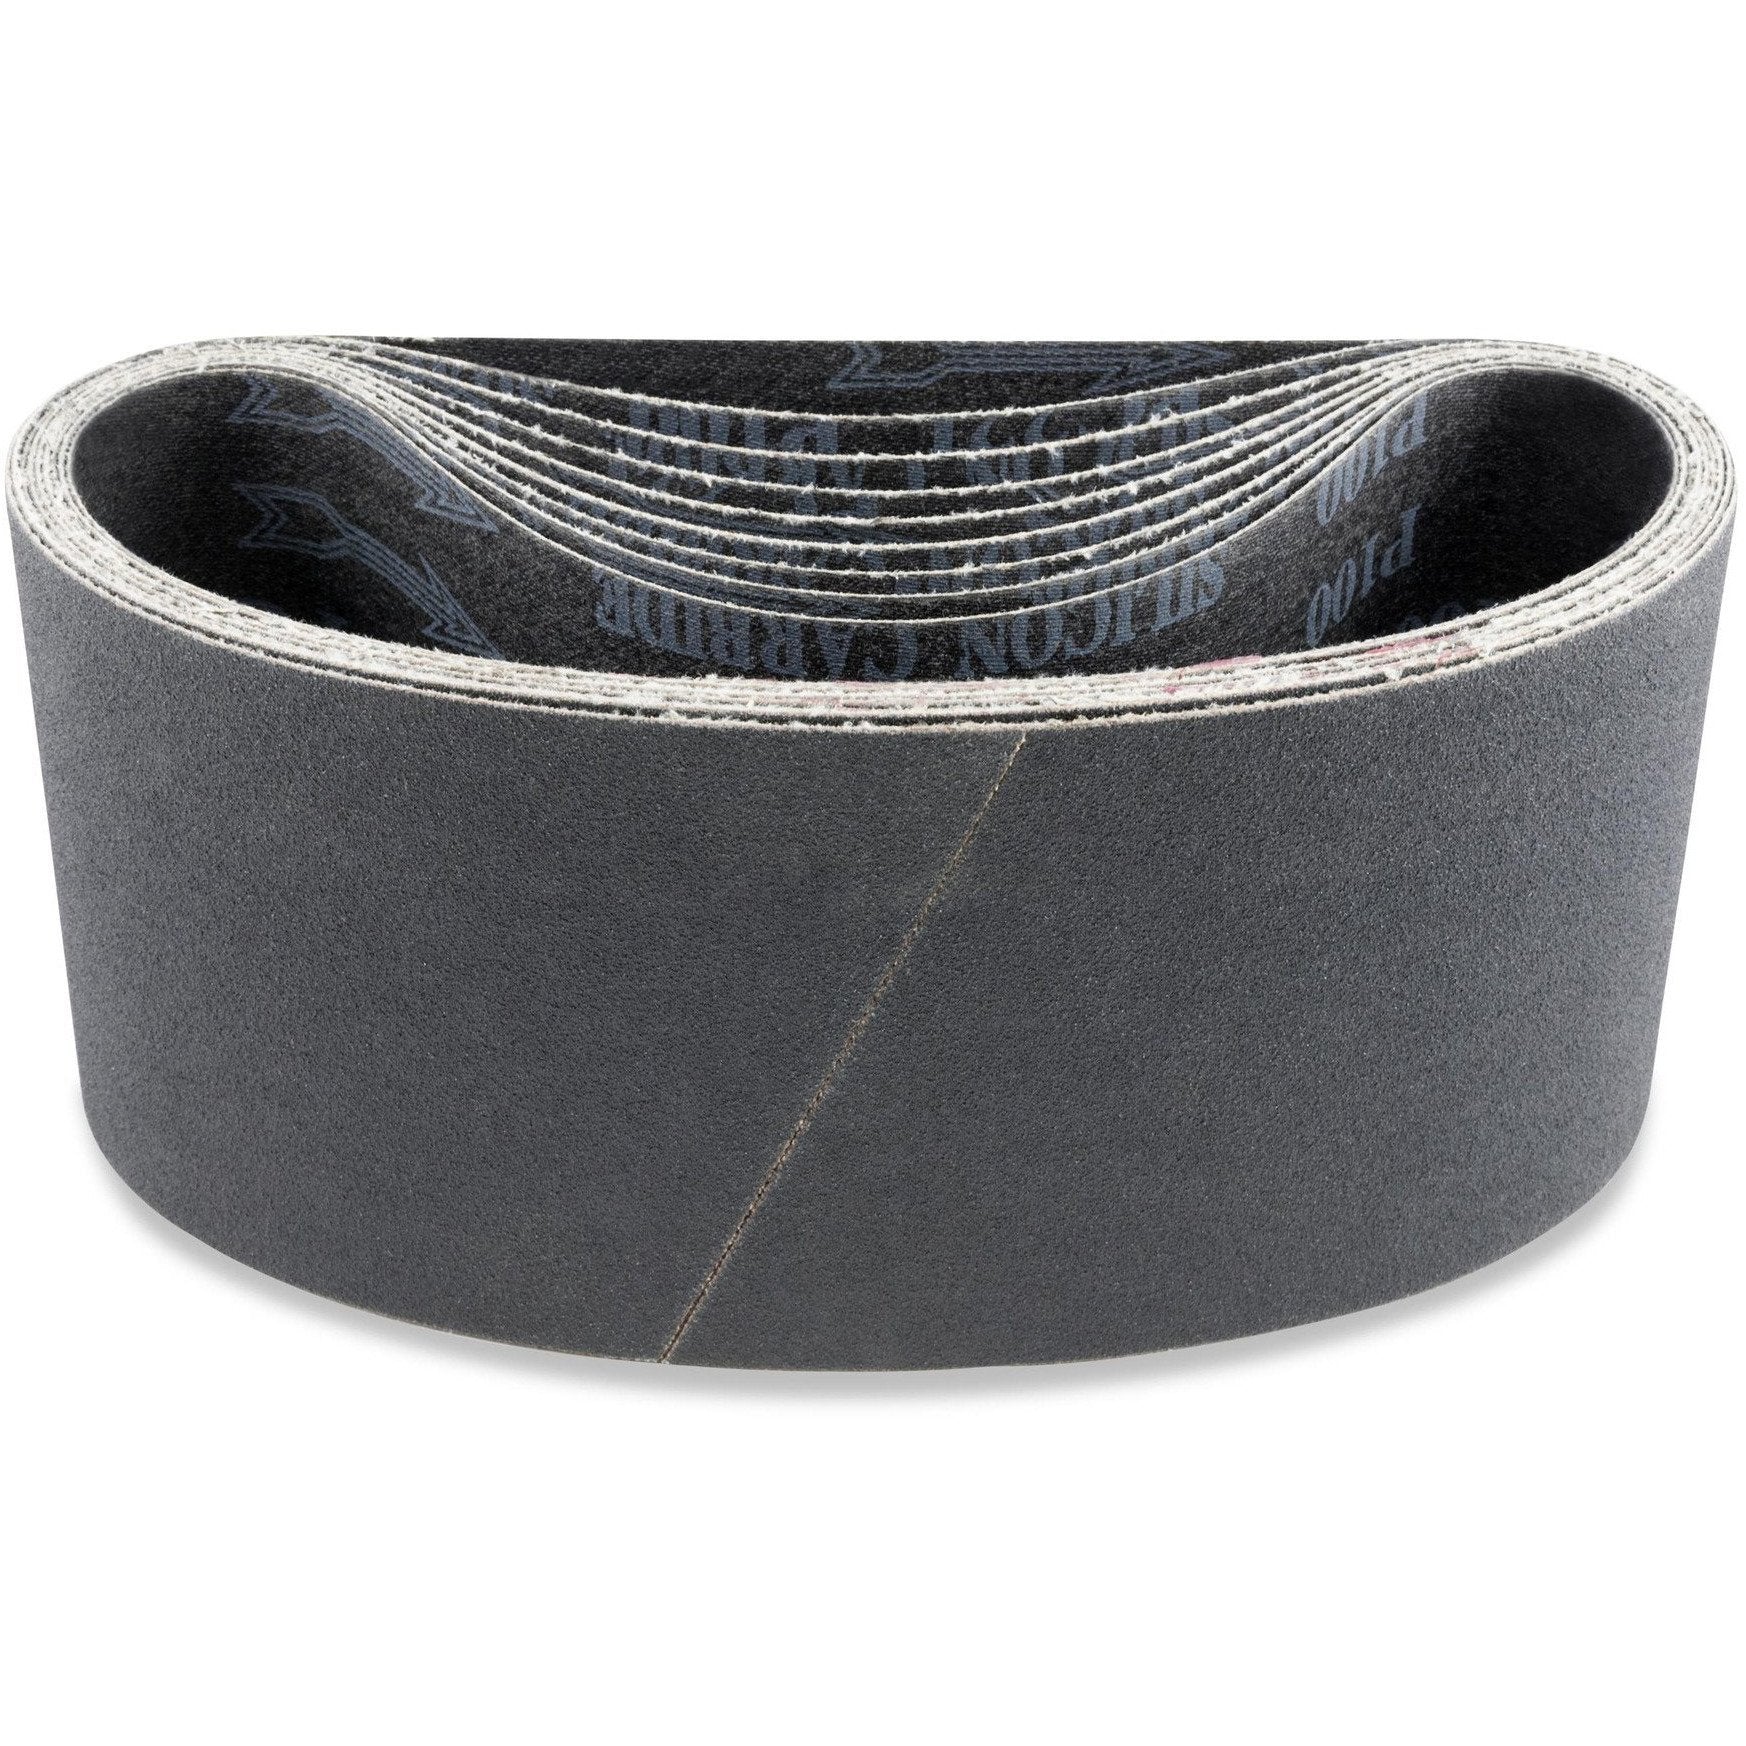 4 X 24 Inch Industrial Grade Silicon Carbide Sanding Belts, 3 Pack - Red Label Abrasives